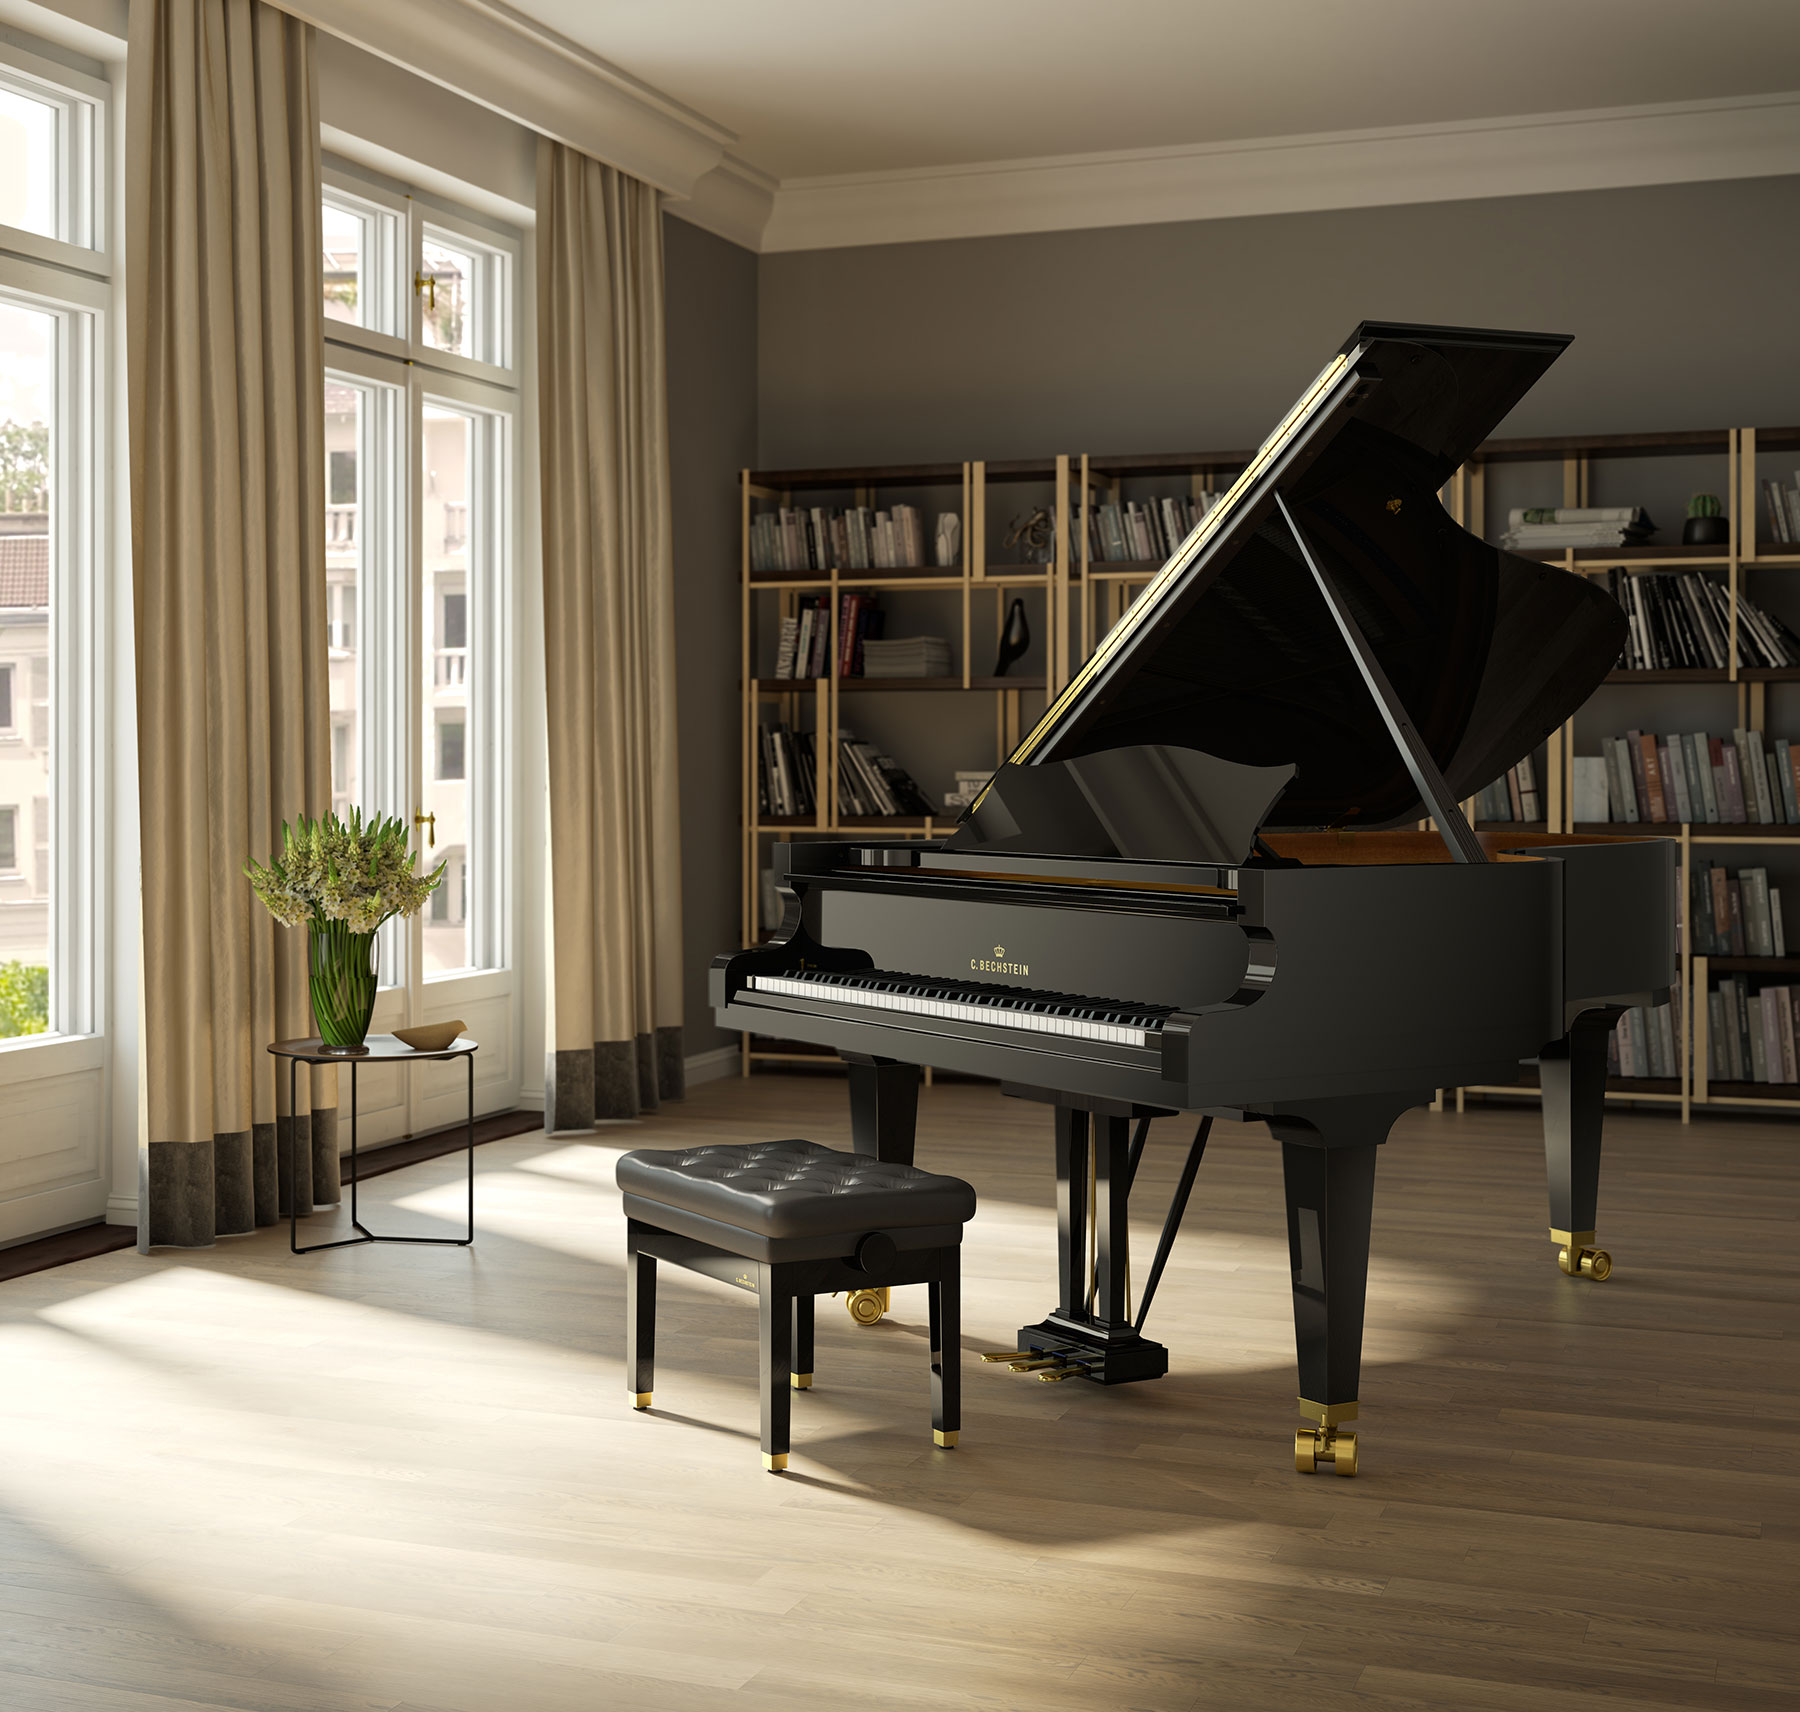 C. Bechstein grand piano in an apartment